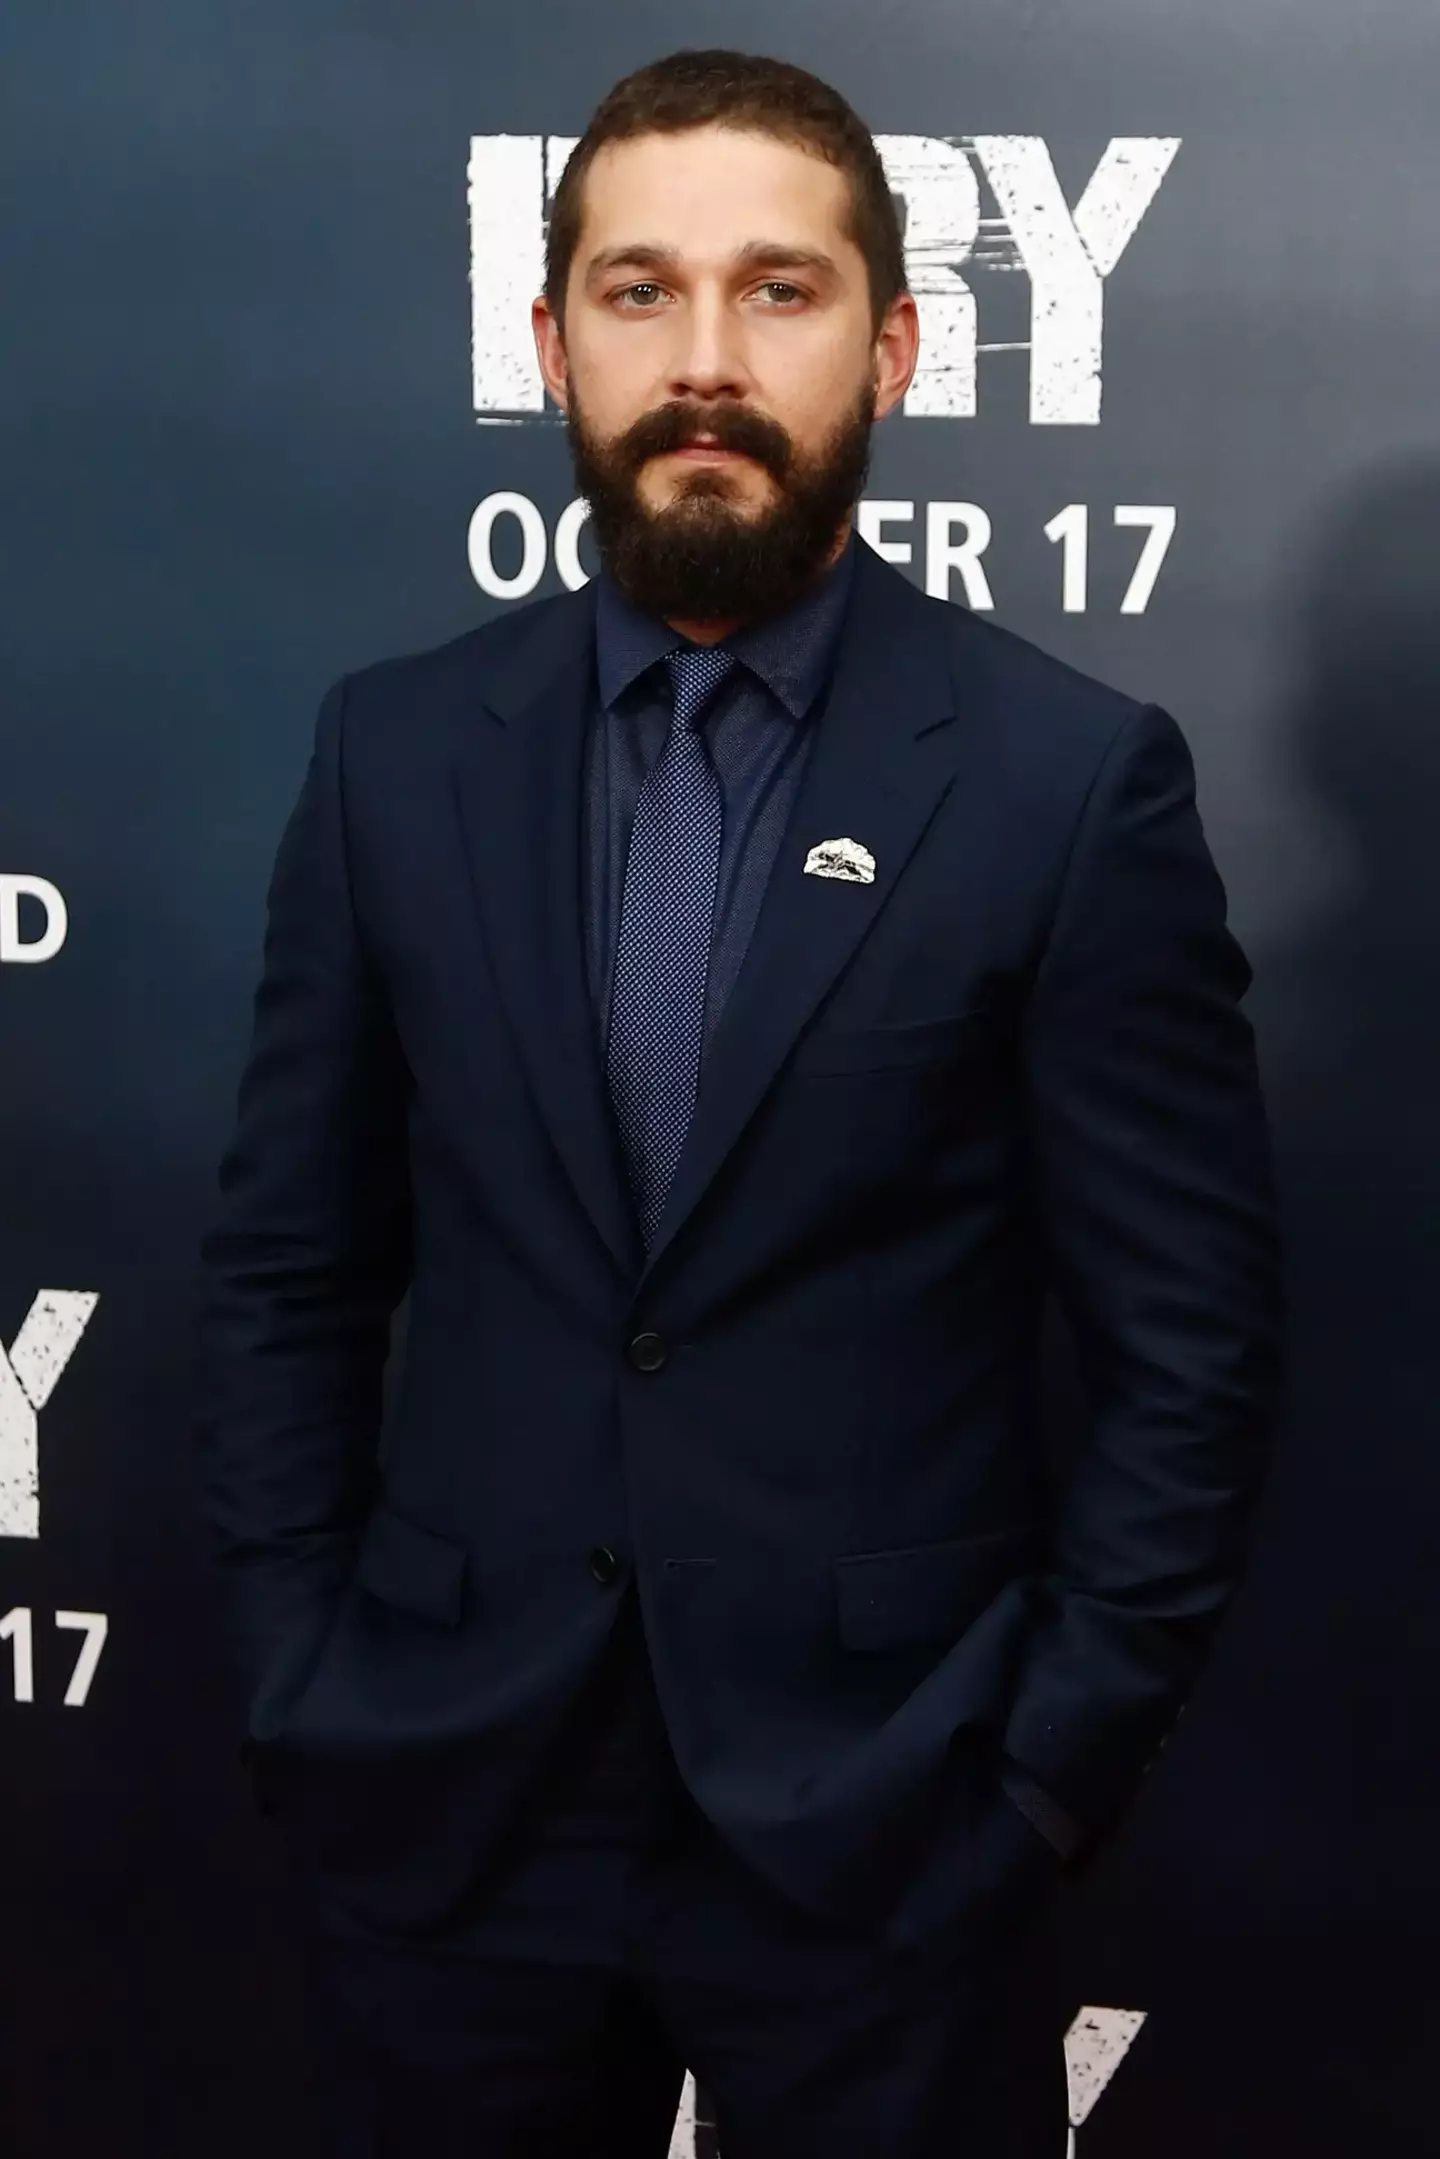 Shia LaBeouf responded to claims he was sacked from Don't Worry Darling.